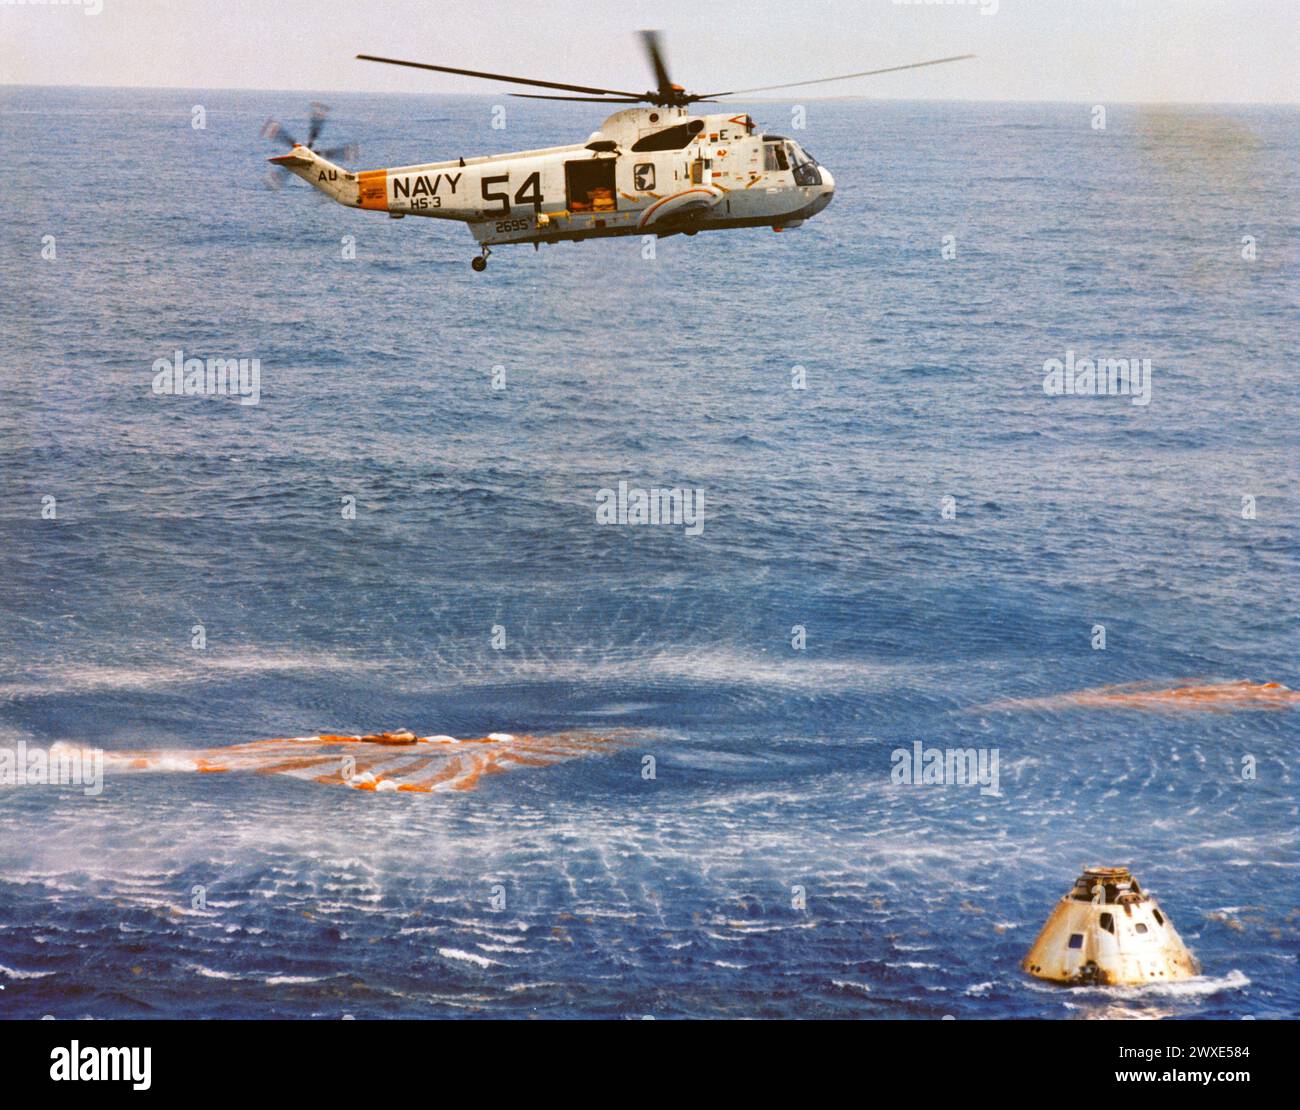 Immediately after splashdown a recovery helicopter from the USS Guadalcanal hovers over the Apollo 9 spacecraft. Still inside the Command Module (CM) are astronauts James A. McDivitt, David R. Scott, and Russell L. Schweickart. Splashdown occurred at 12:00:53 p.m. (EST), 13 March 1969. only 4.5 nautical miles from the USS Guadalcanal, the prime recovery ship, to conclude a successful 10-day Earth-orbital mission in space.  An optimised and enhanced version of an original NASA image / mandatory credit: NASA Stock Photo